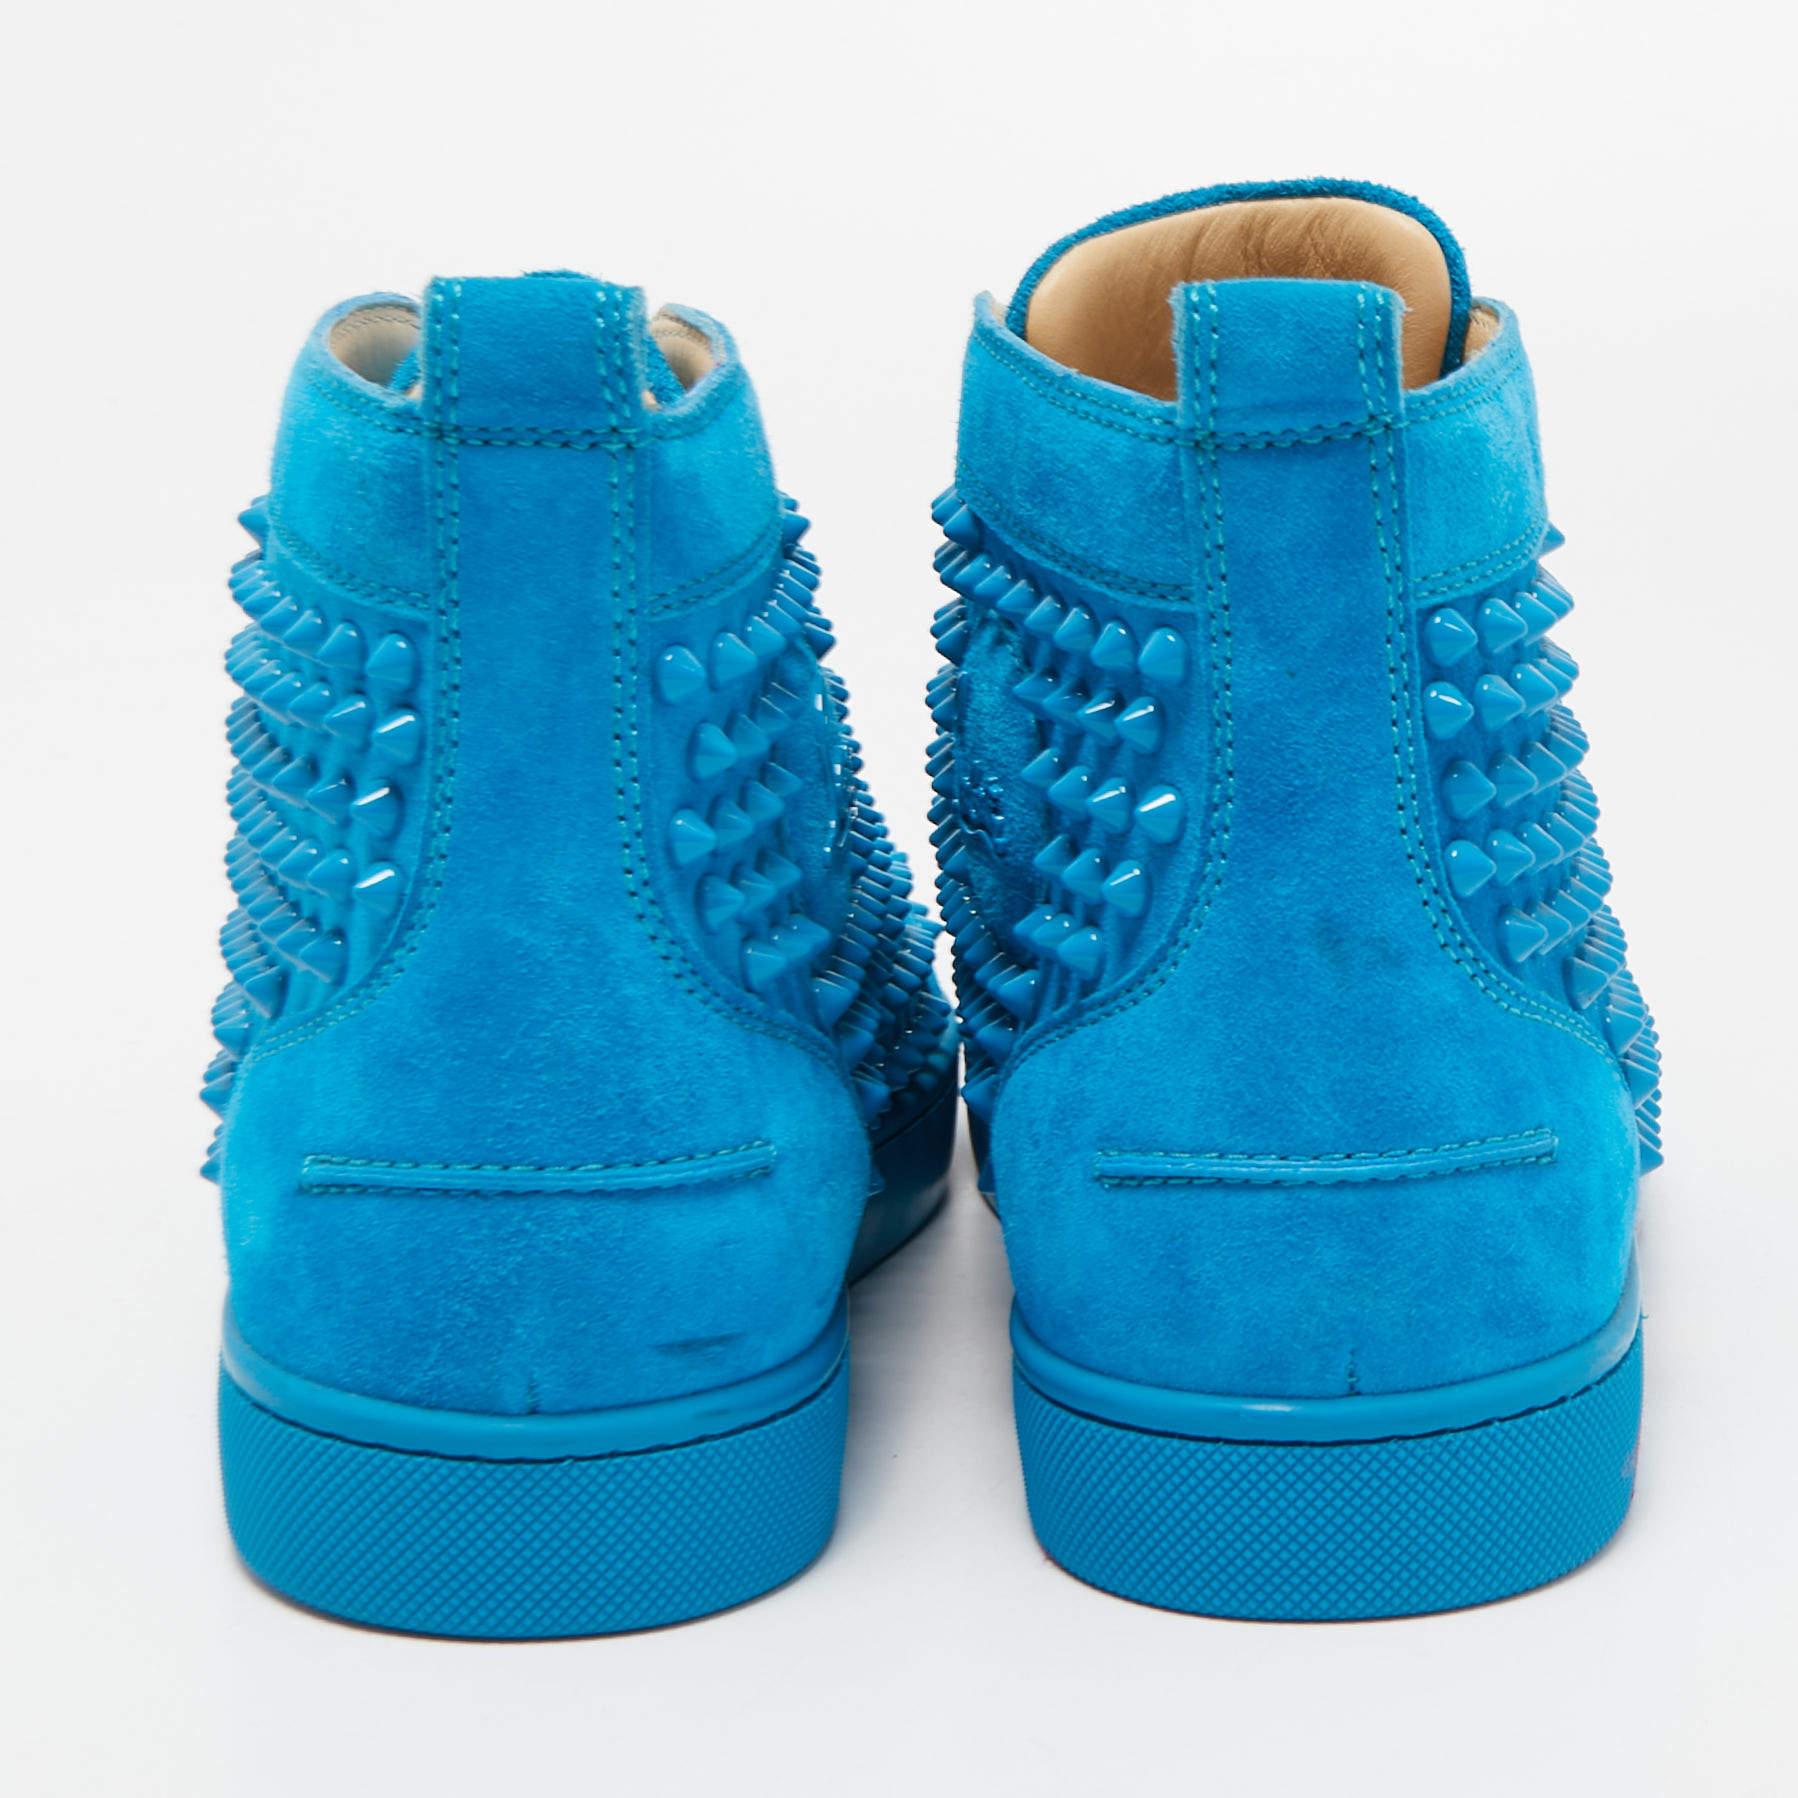 Christian Louboutin Blue Suede Louis Spike High Top Sneakers Size 39.5 2